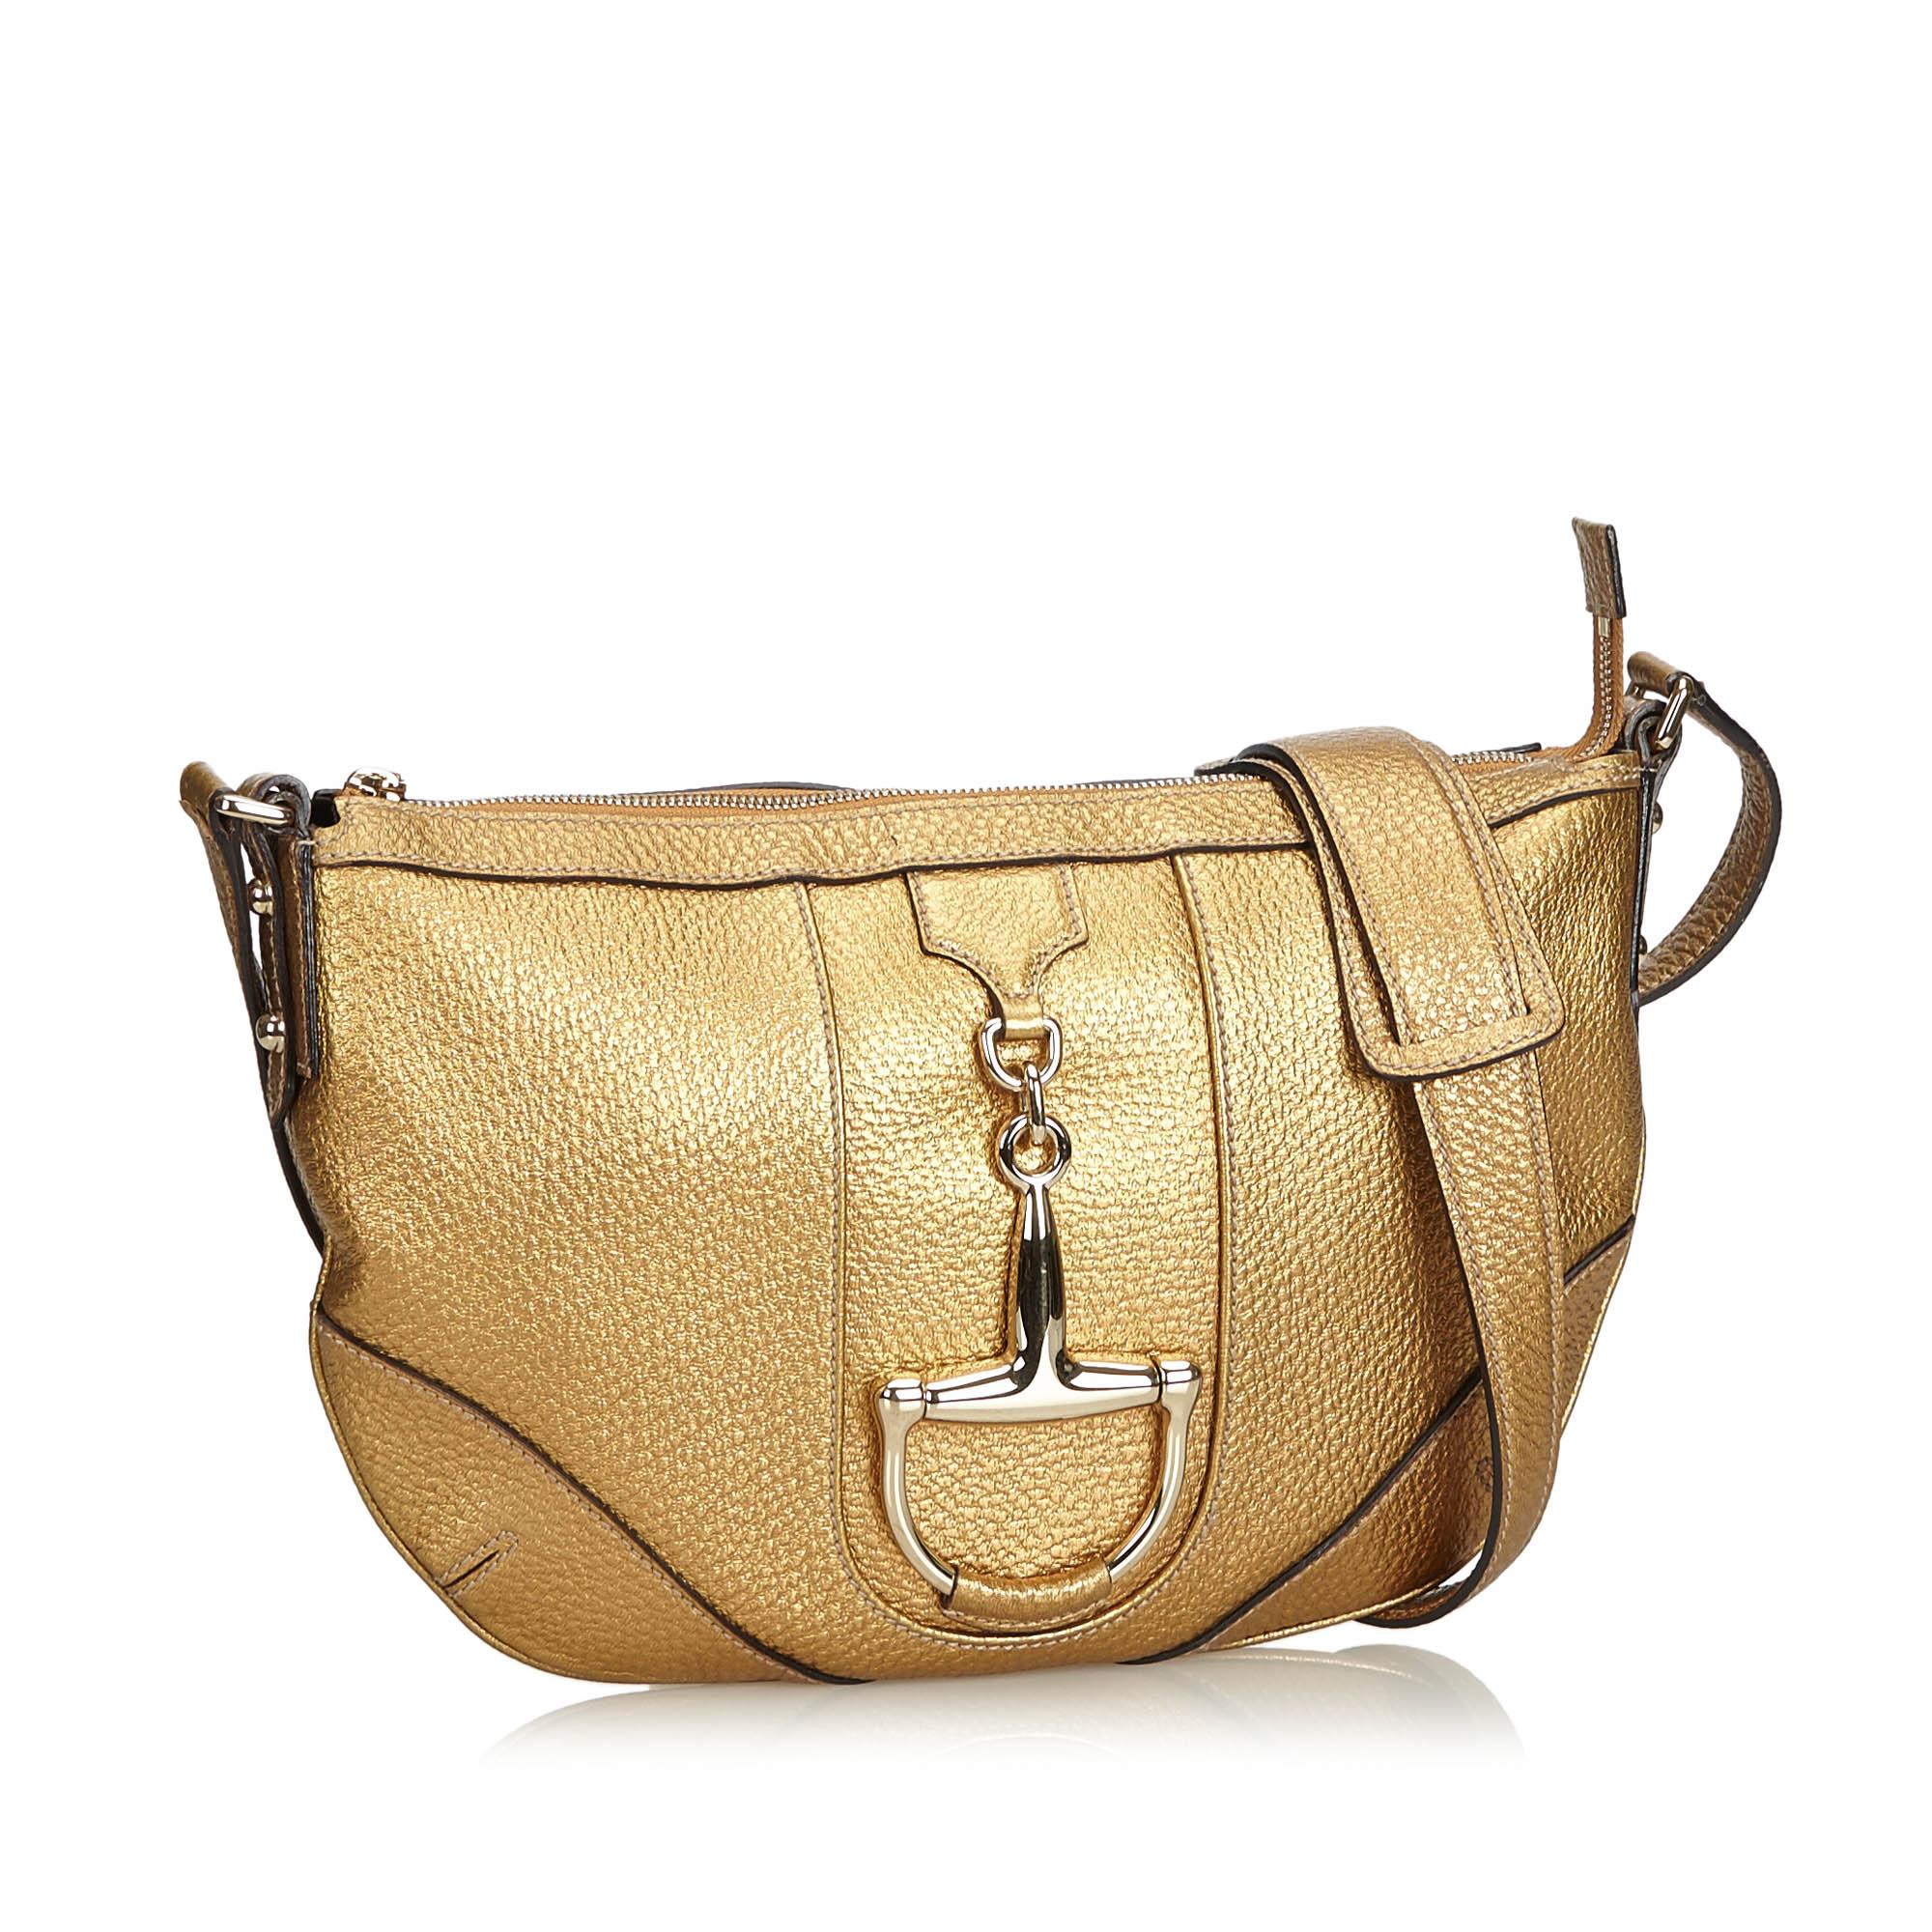 This crossbody bag features a metallic leather body, adjustable leather strap, top zip closure, and interior zip pocket. It carries as A condition rating.

Inclusions: 
Dust Bag

Dimensions:
Length: 23.00 cm
Width: 34.00 cm
Depth: 1.50 cm

Material: